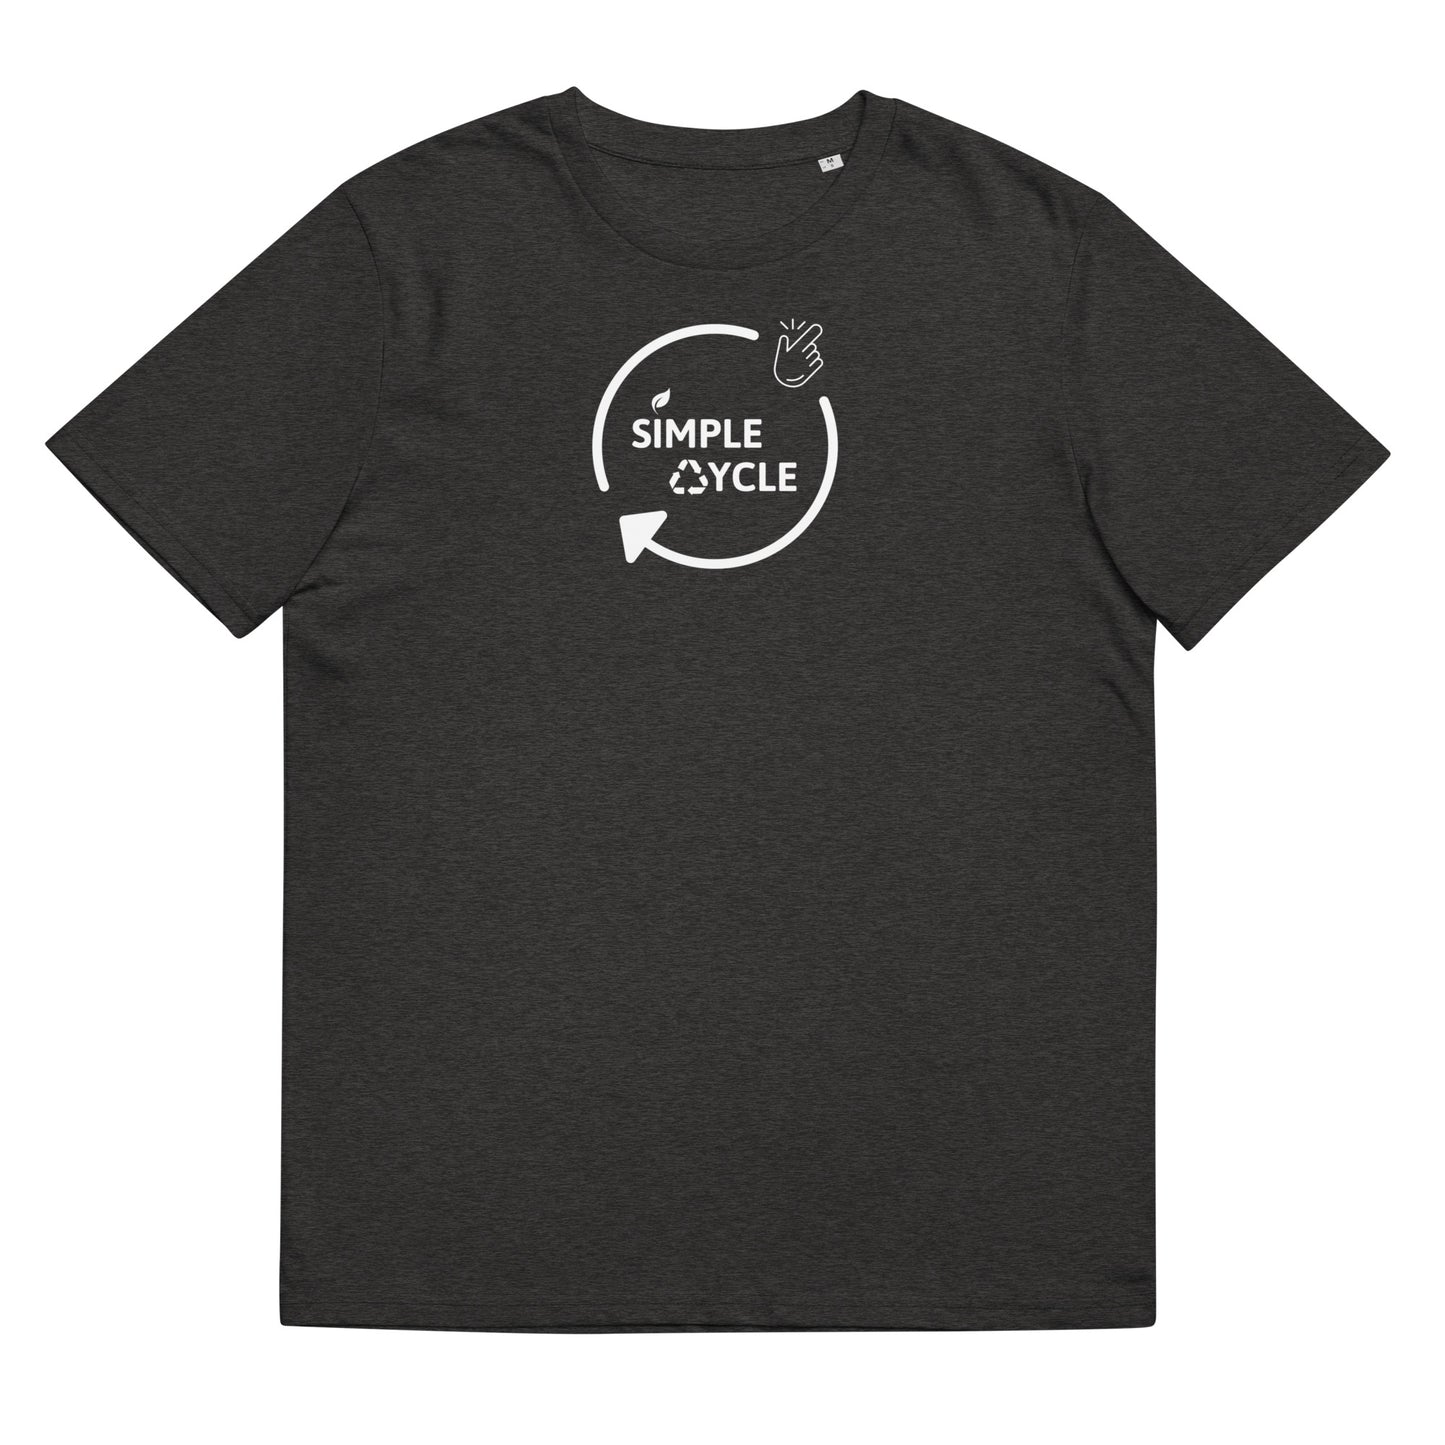 SimpleCycle Unisex Organic Cotton T-Shirt grey front view